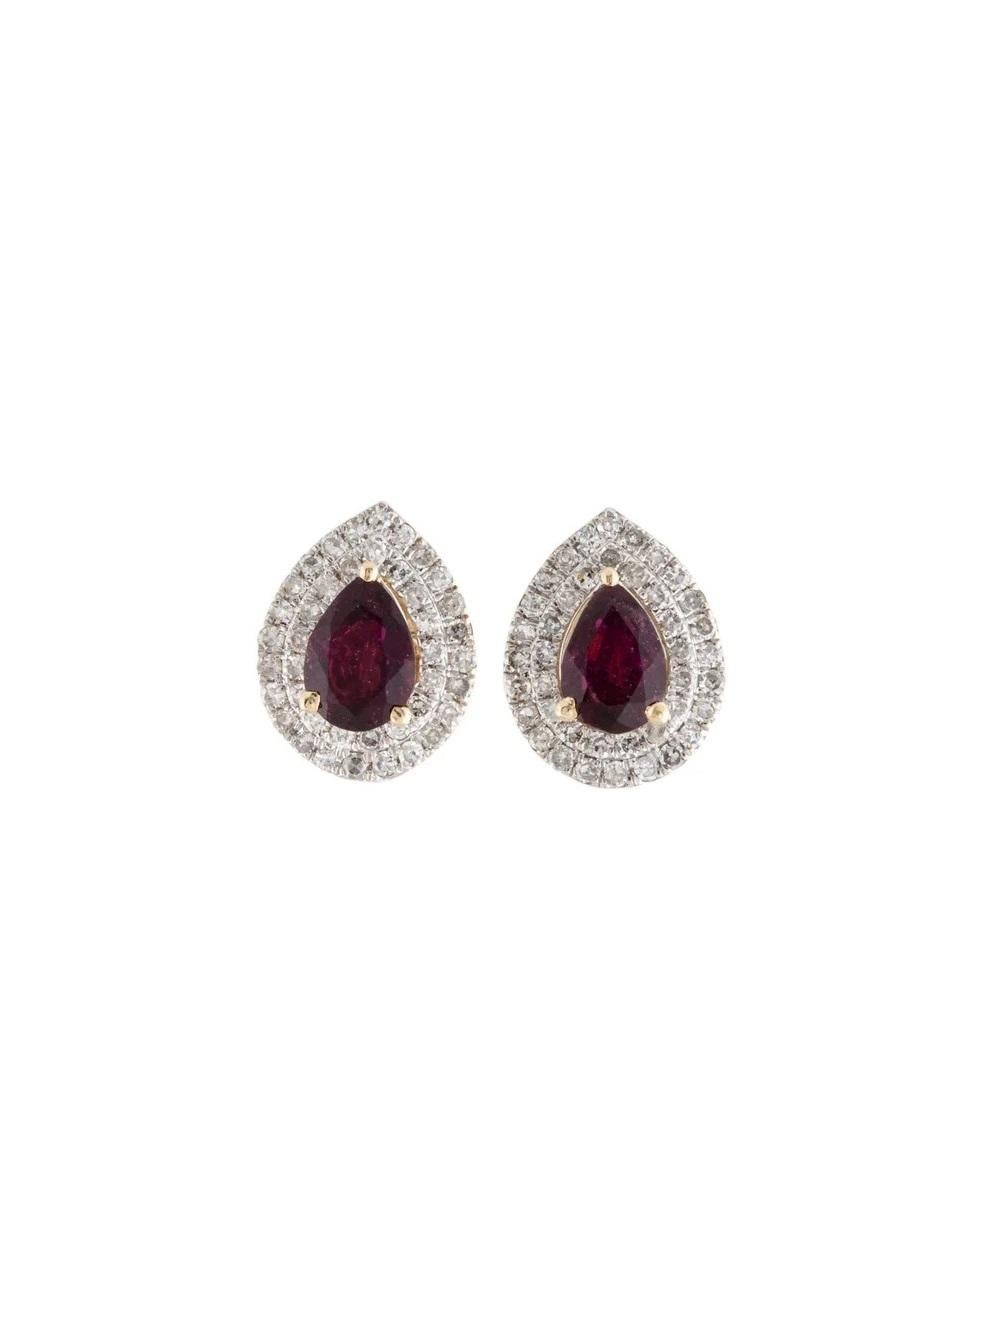 14K Tourmaline & Diamond Stud Earrings - Elegant & Timeless Statement Jewelry In New Condition For Sale In Holtsville, NY